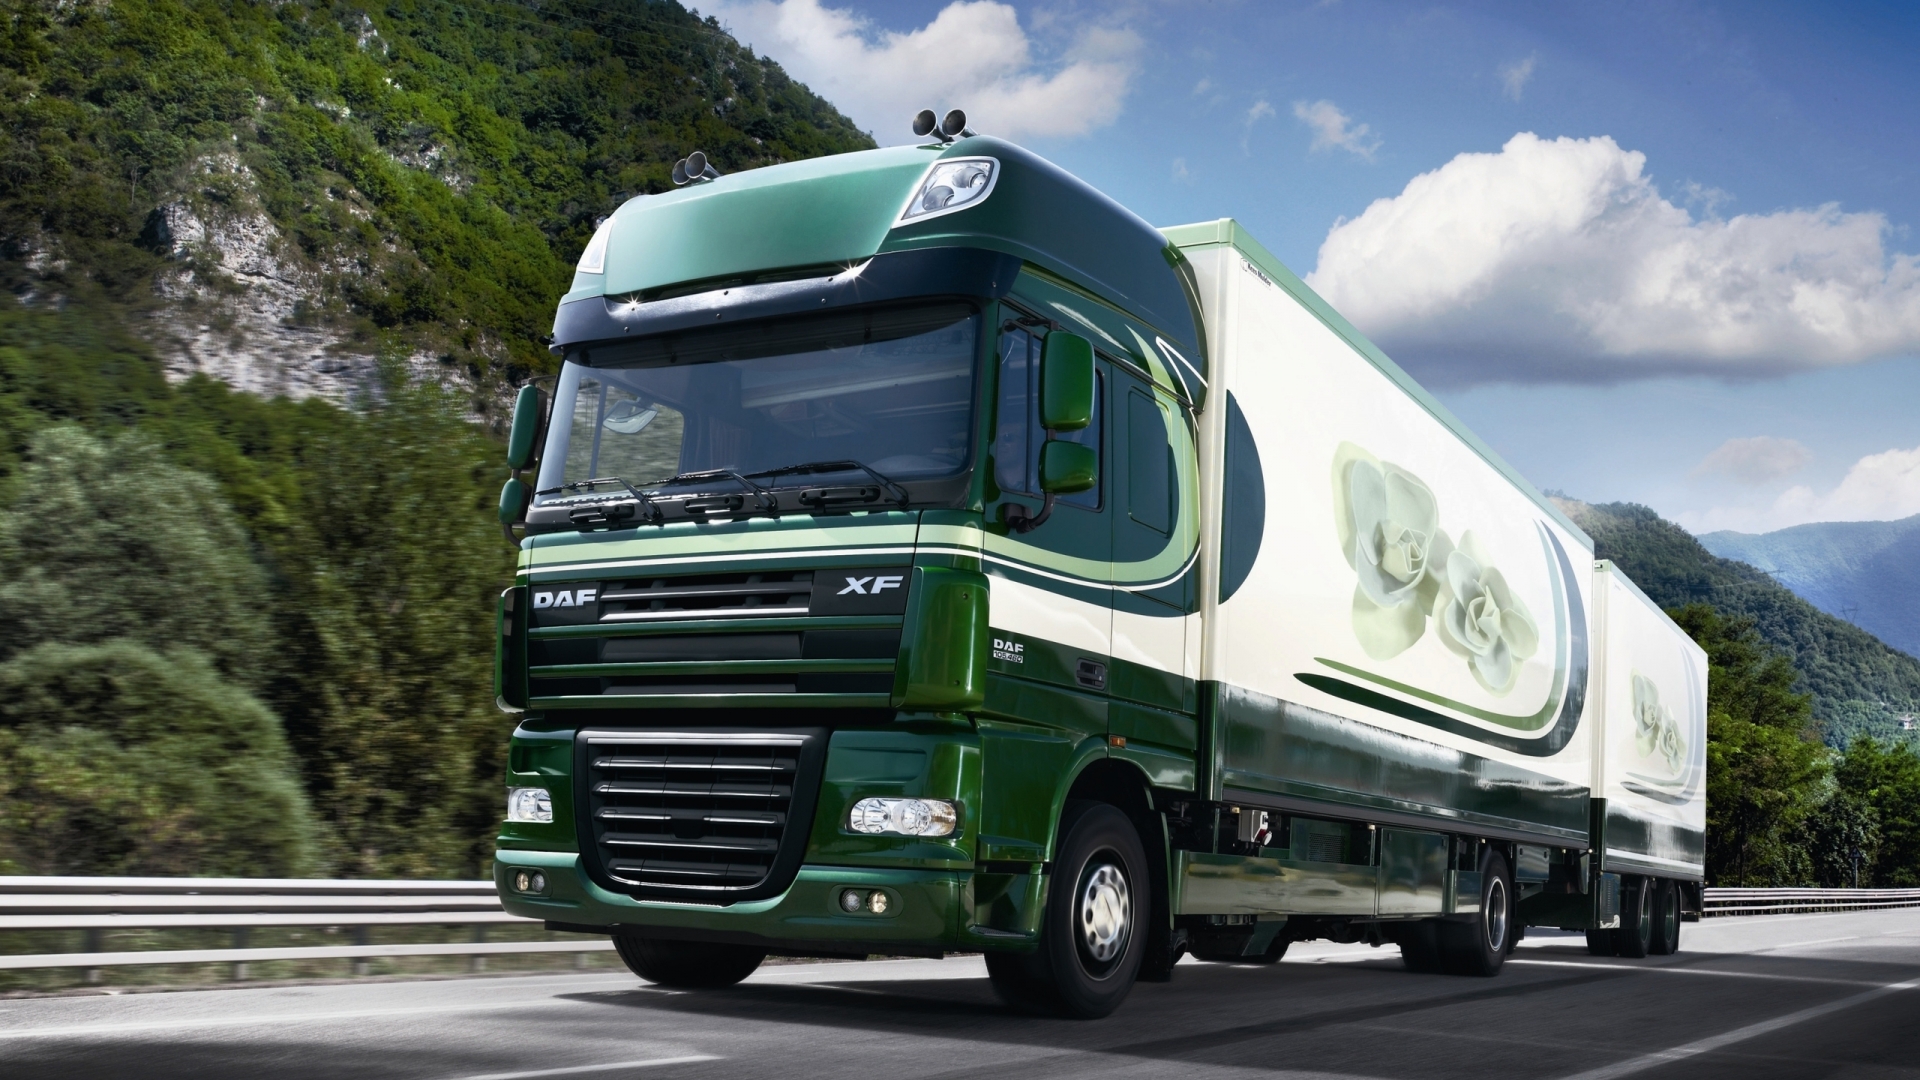 DAF XF 105 Truck for 1920 x 1080 HDTV 1080p resolution